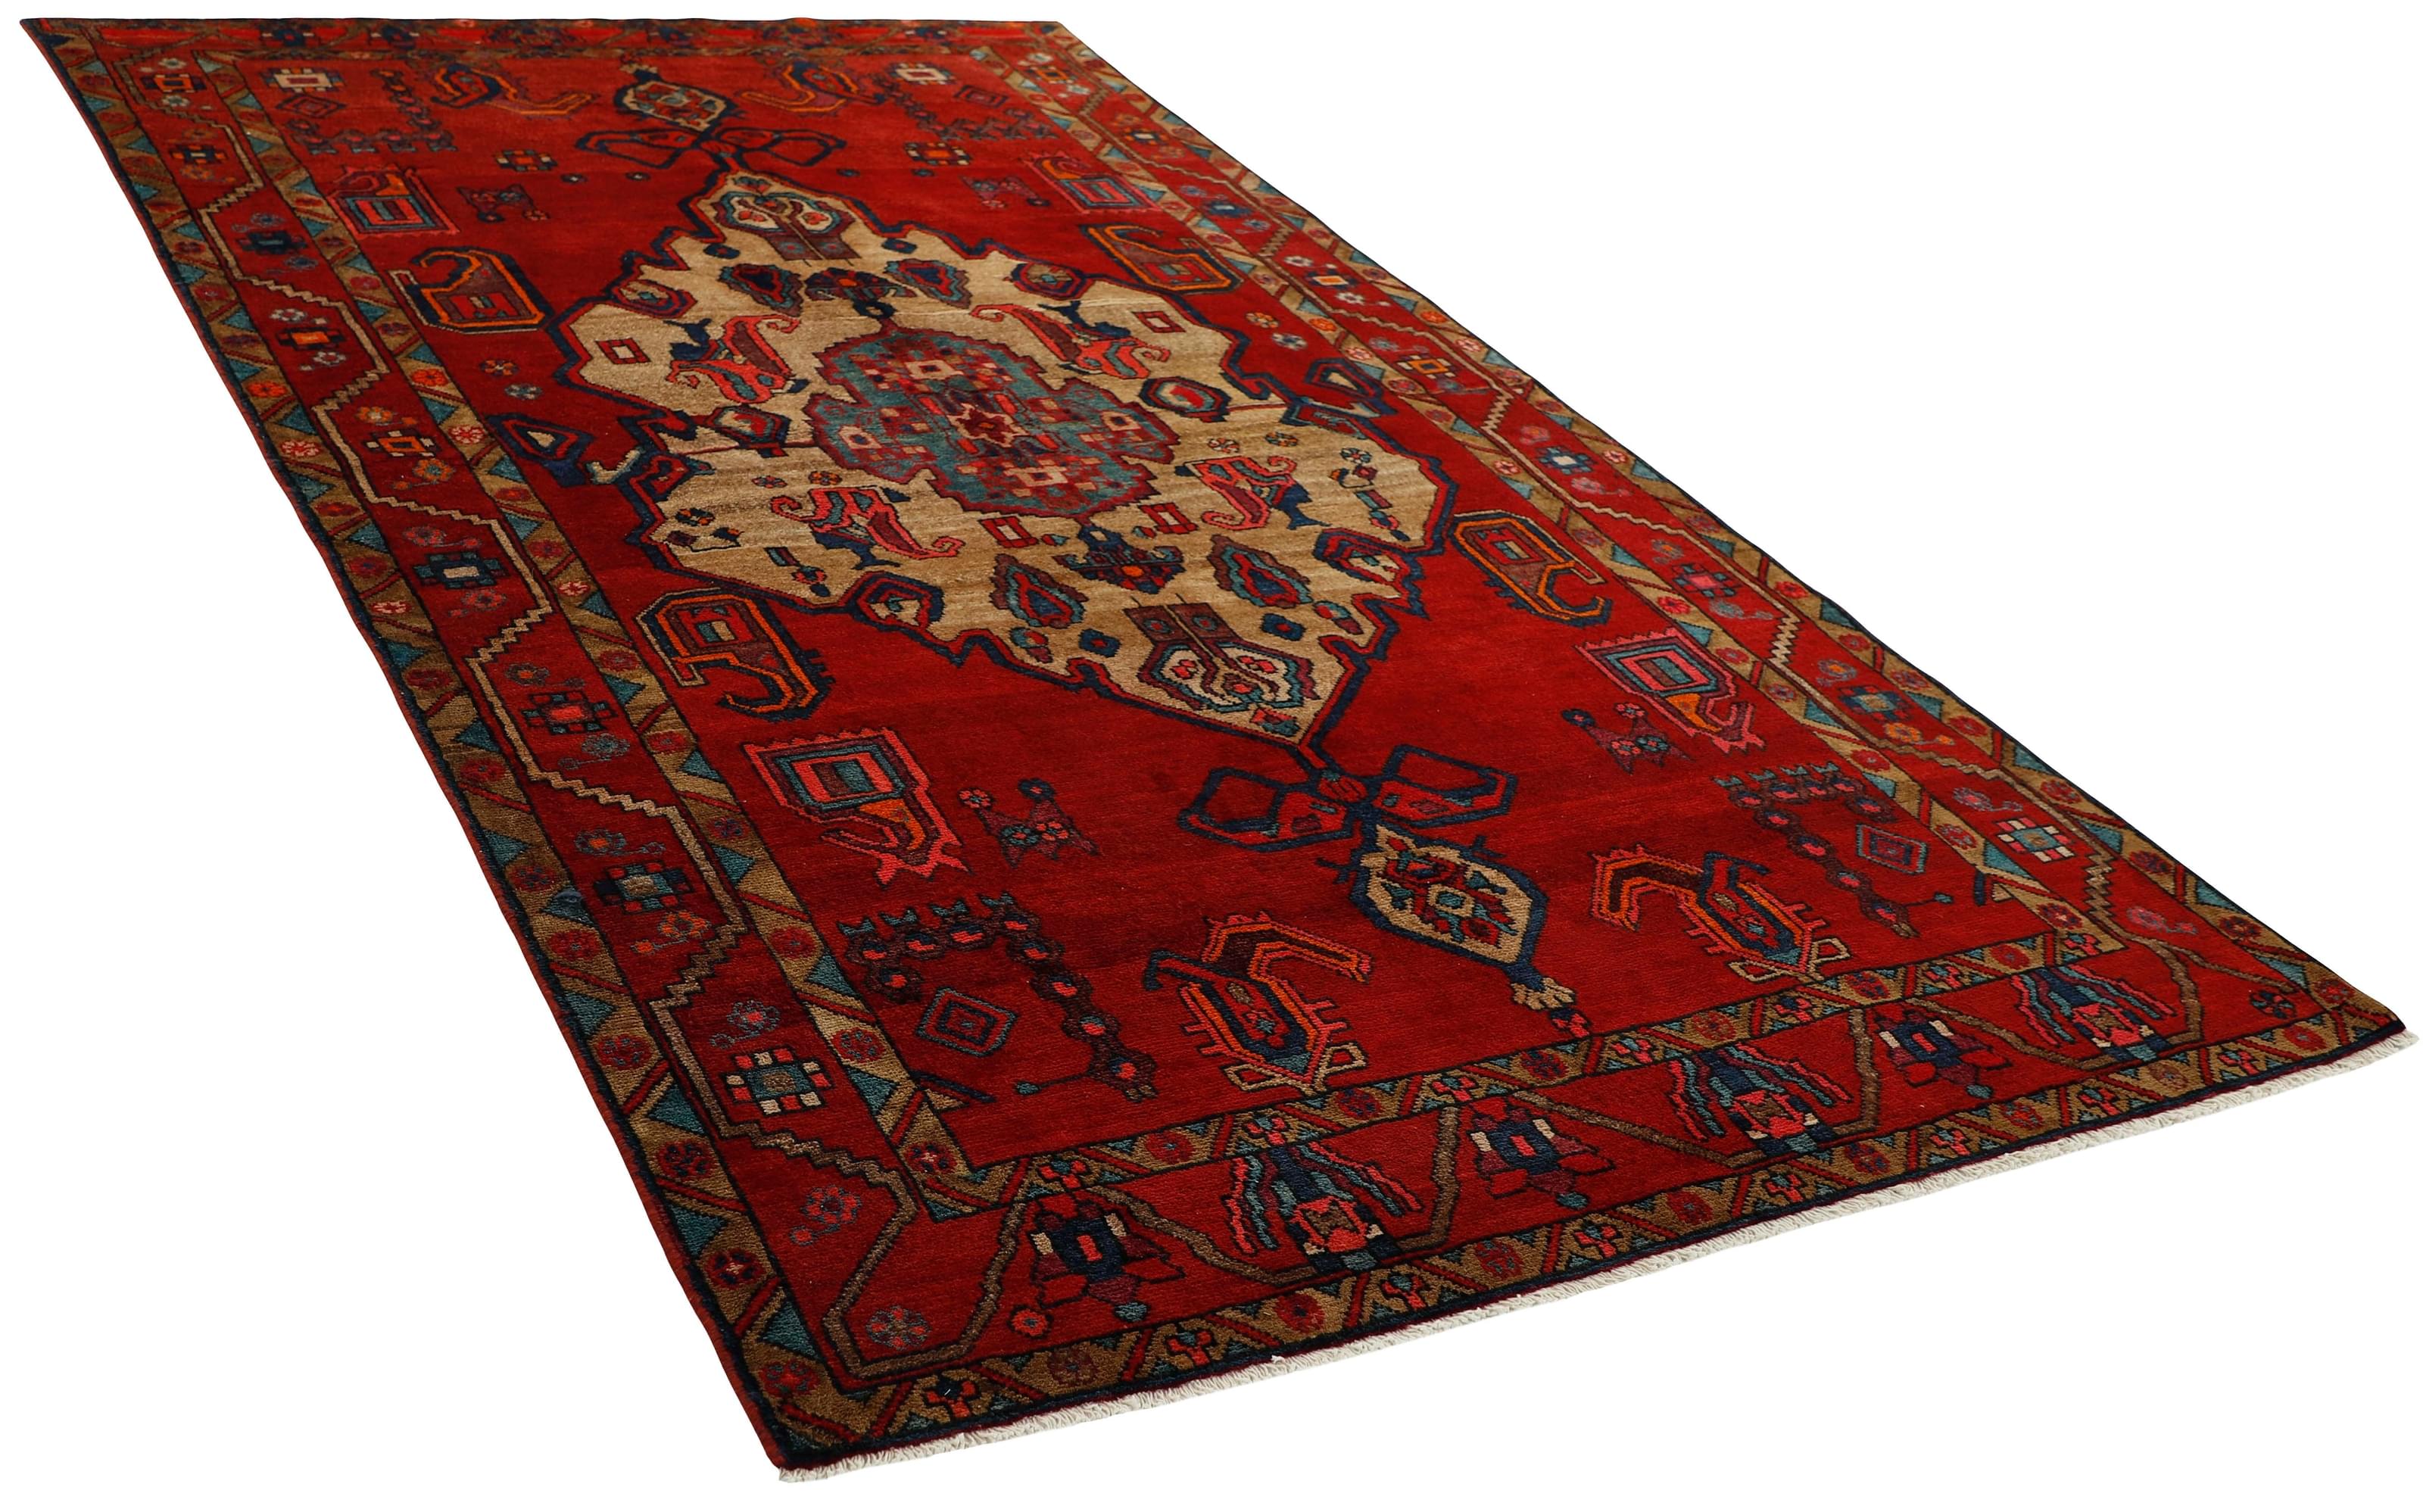 Red and black traditional persian rug with floral design